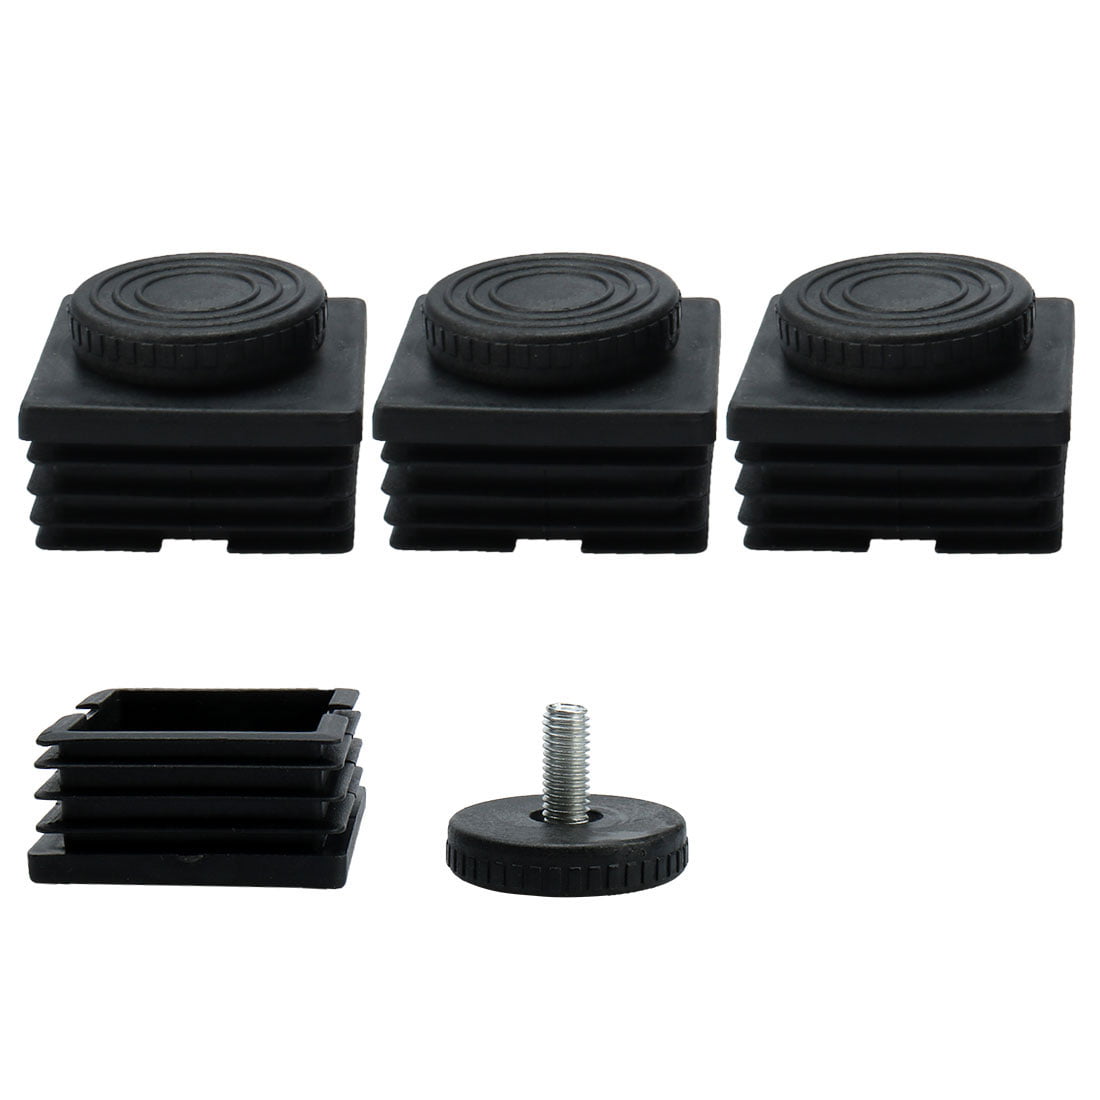 Square Plastic End Caps /Adjustable Table Foot Furniture Leveling Feet M8 Nuts 